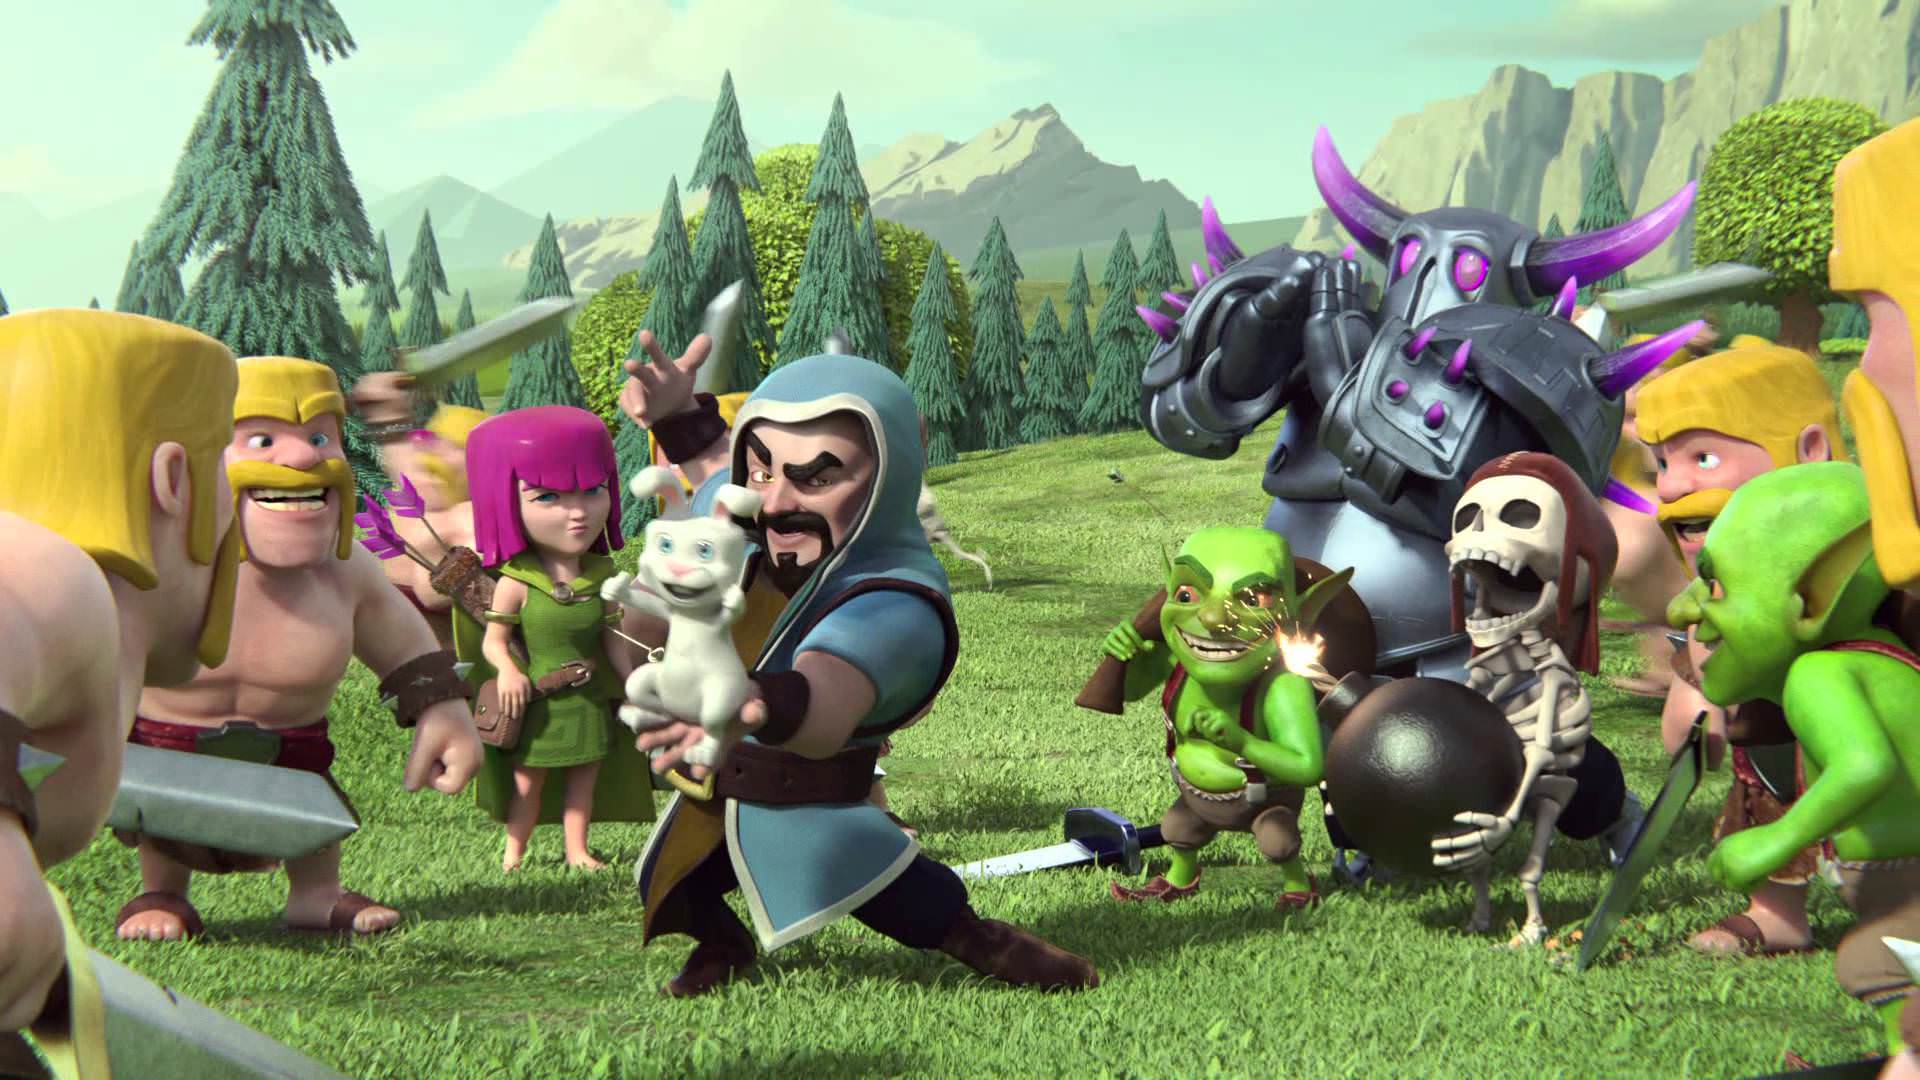 clash of clans wallpaper hd,animated cartoon,pc game,strategy video game,games,adventure game